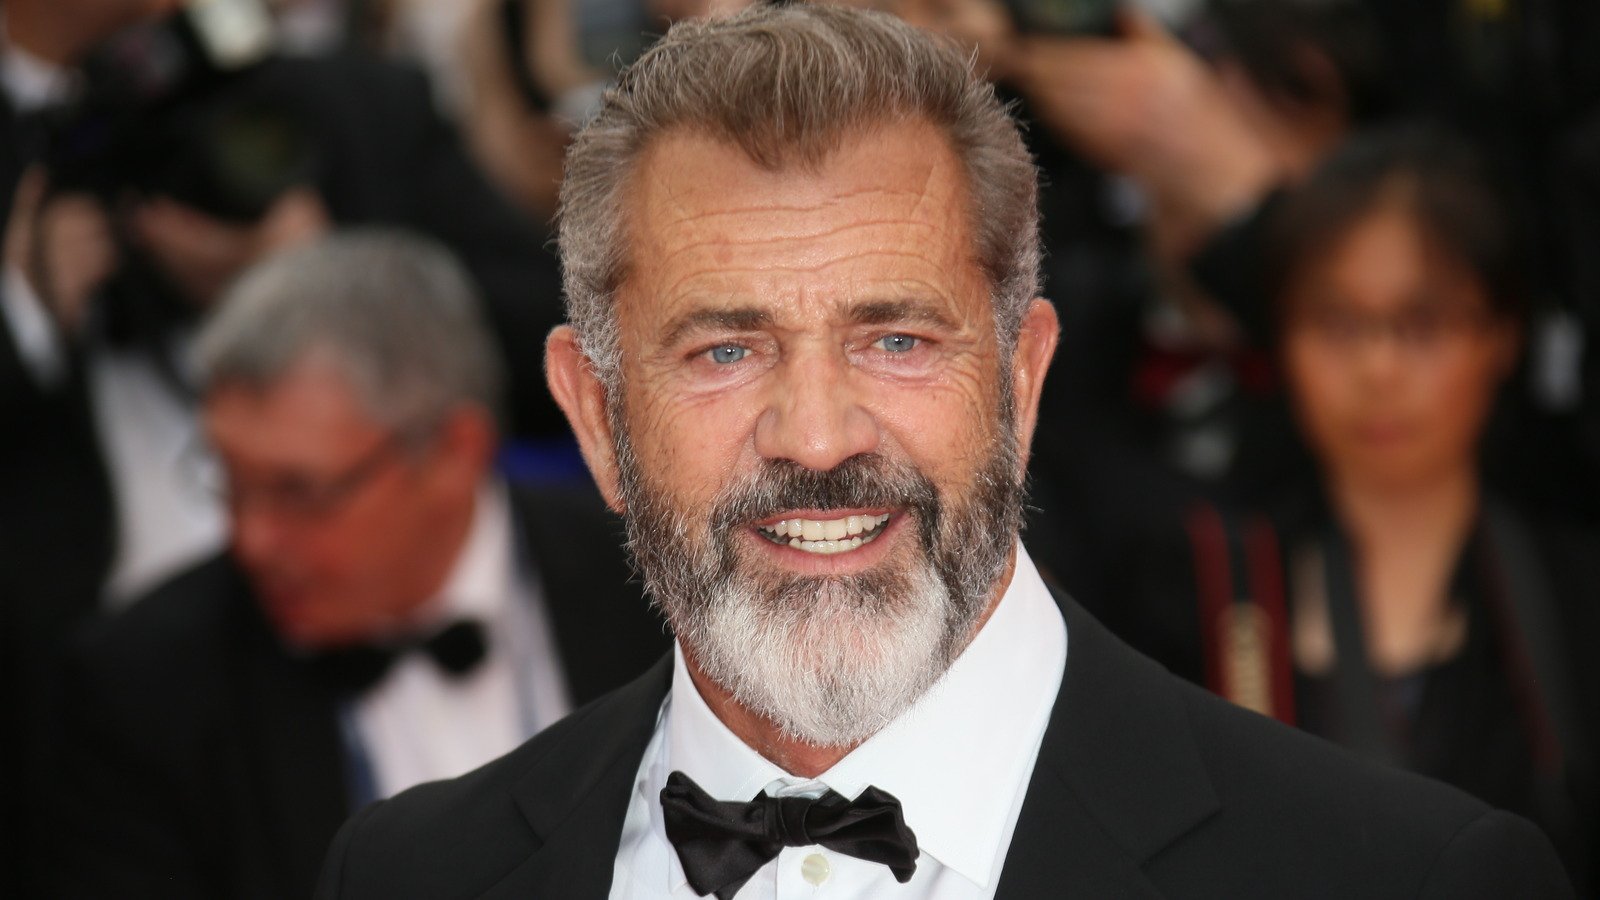 Scandalous details about Mel Gibson's personal life